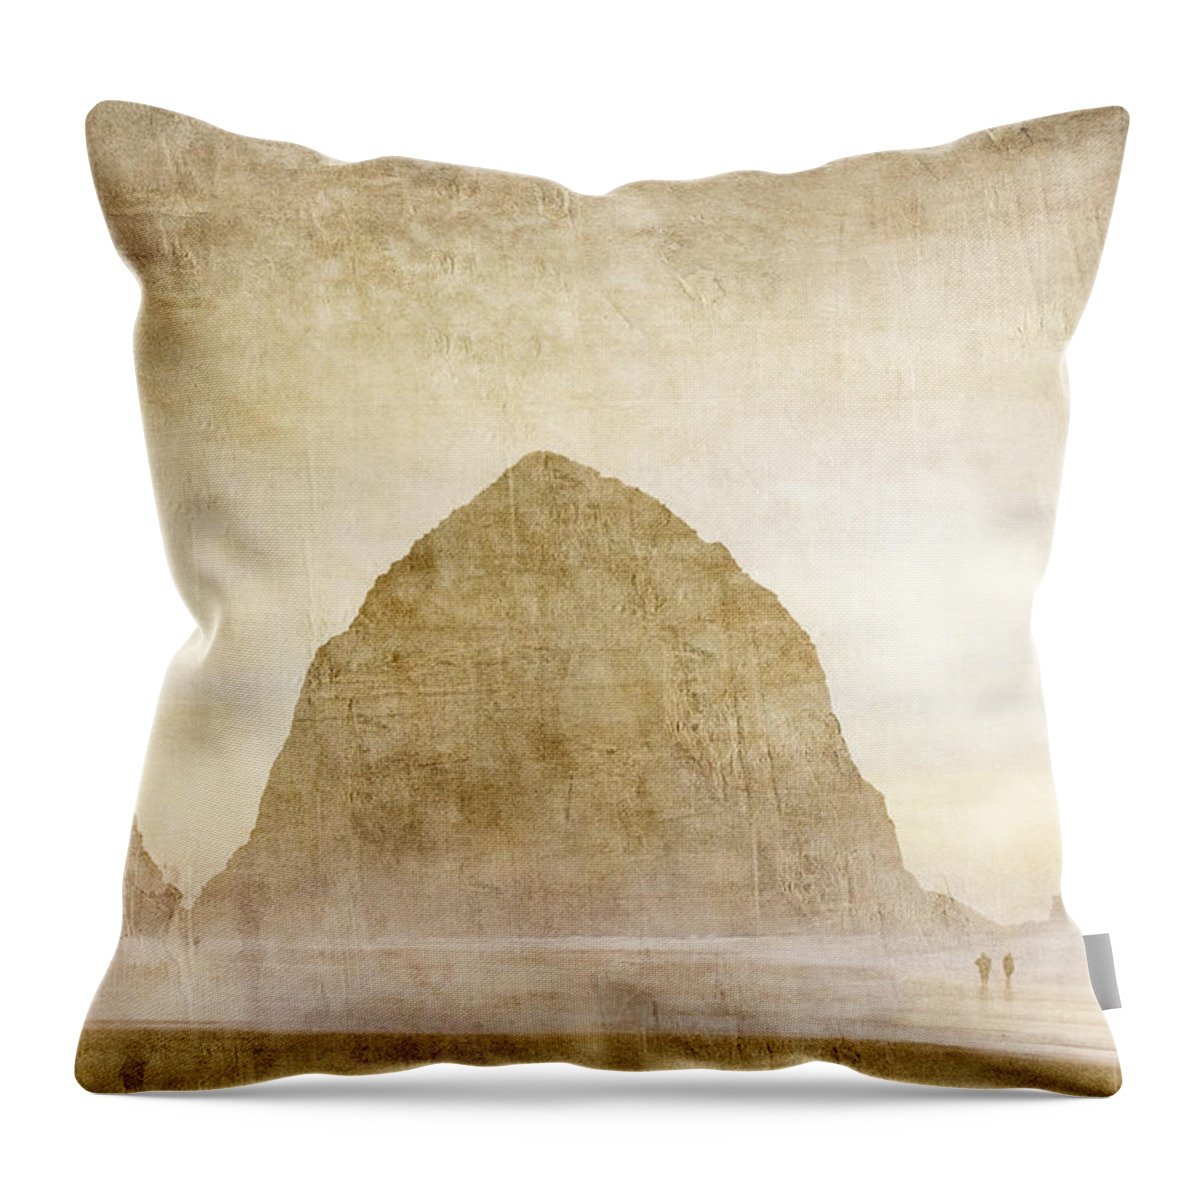 Haystack Rock Throw Pillow featuring the photograph Haystack Rock by Carol Leigh